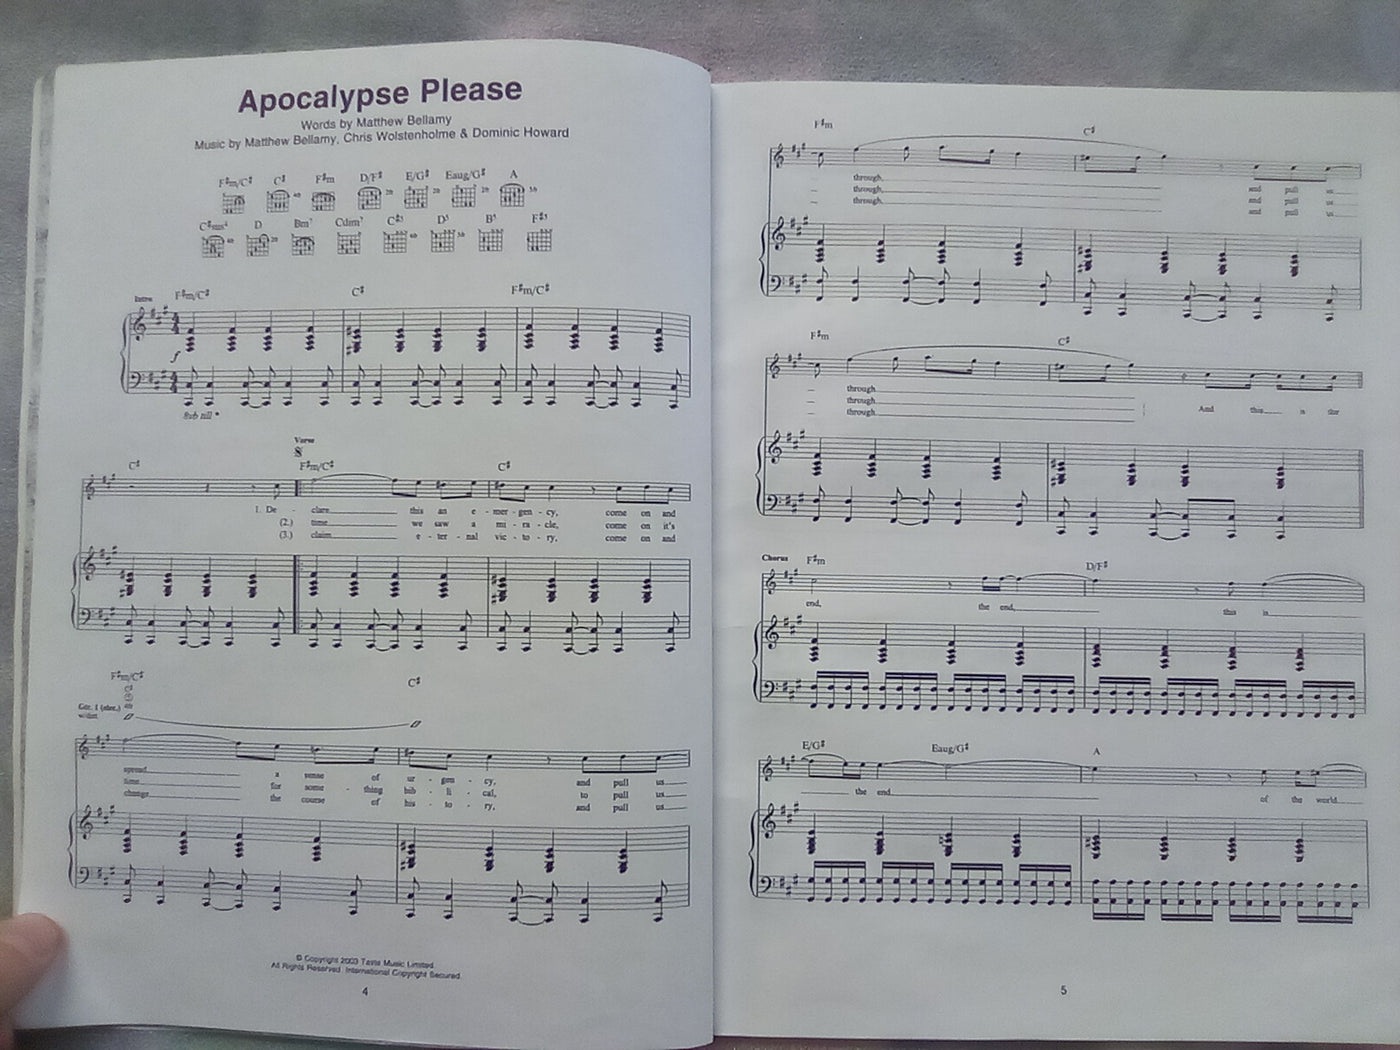 Muse - Absolution Guitar TAB Book